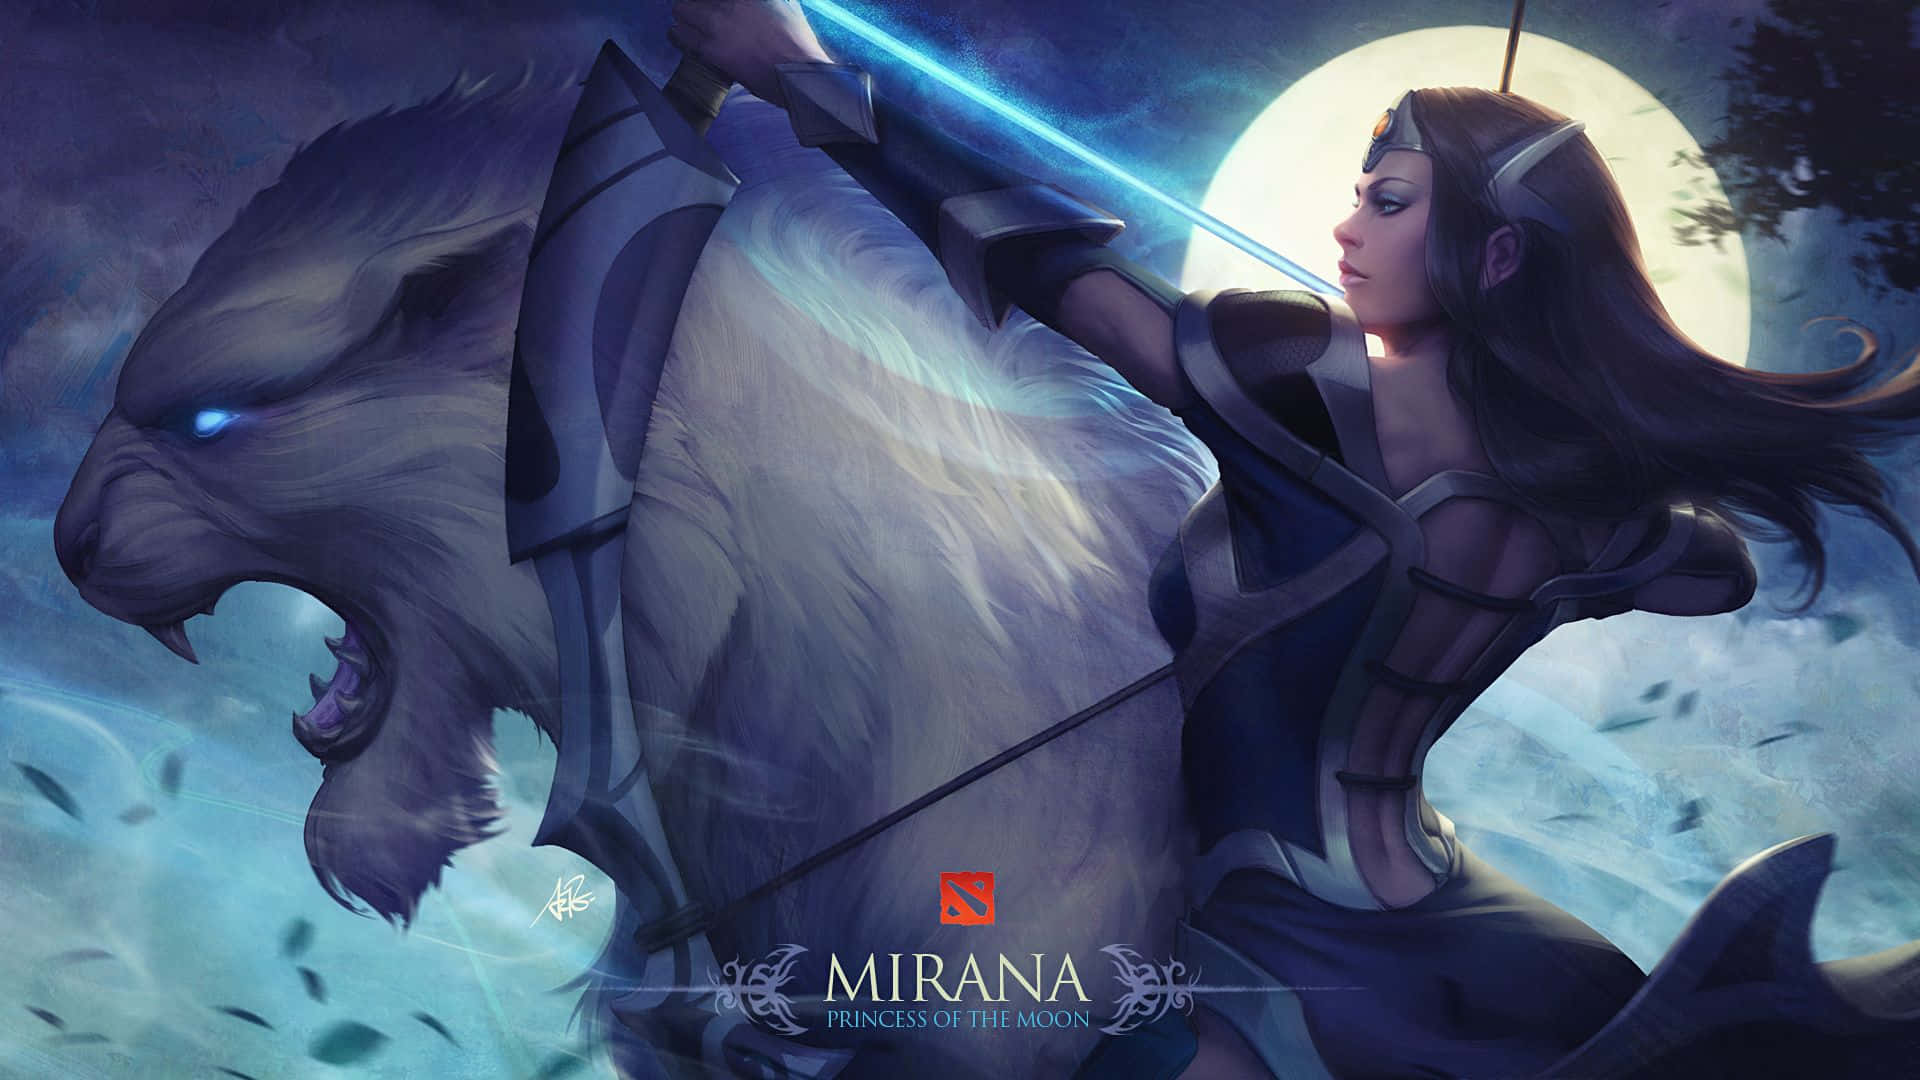 Mirana, the Princess of the Moon, showcasing her bow in a stunning night scene Wallpaper